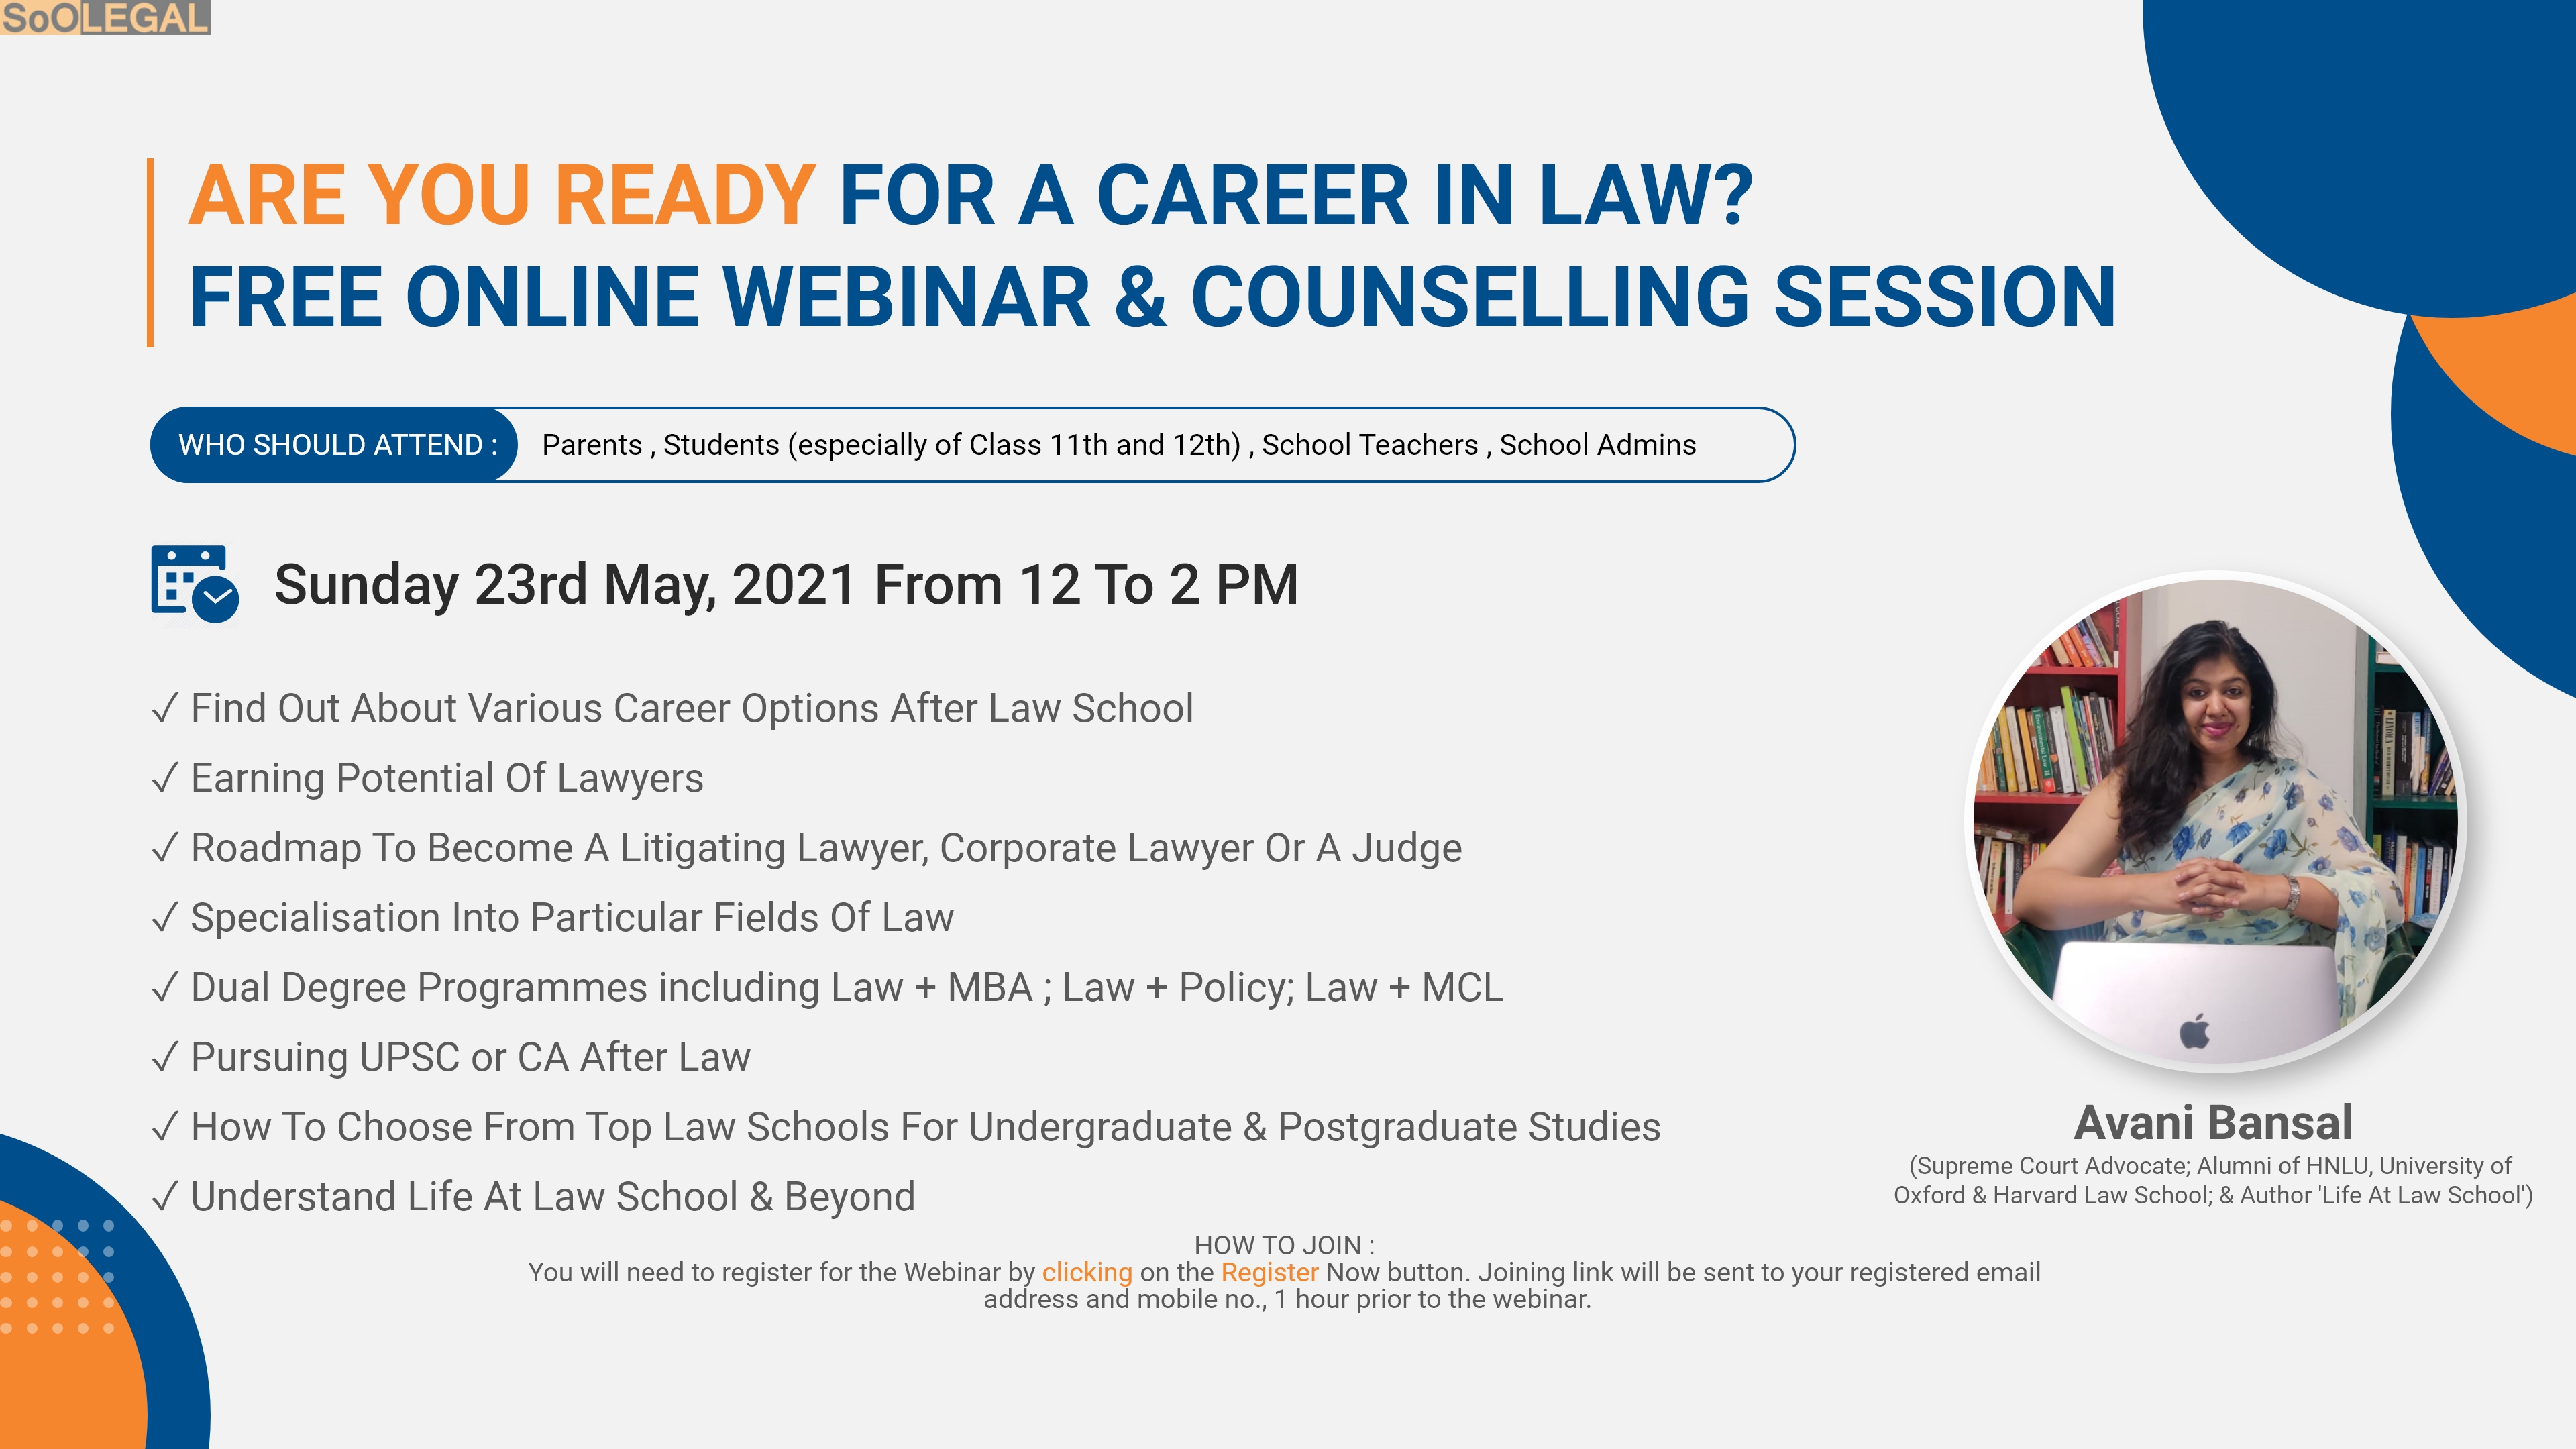 ARE YOU READY FOR A CAREER IN LAW? FREE ONLINE WEBINAR & COUNSELLING SESSION